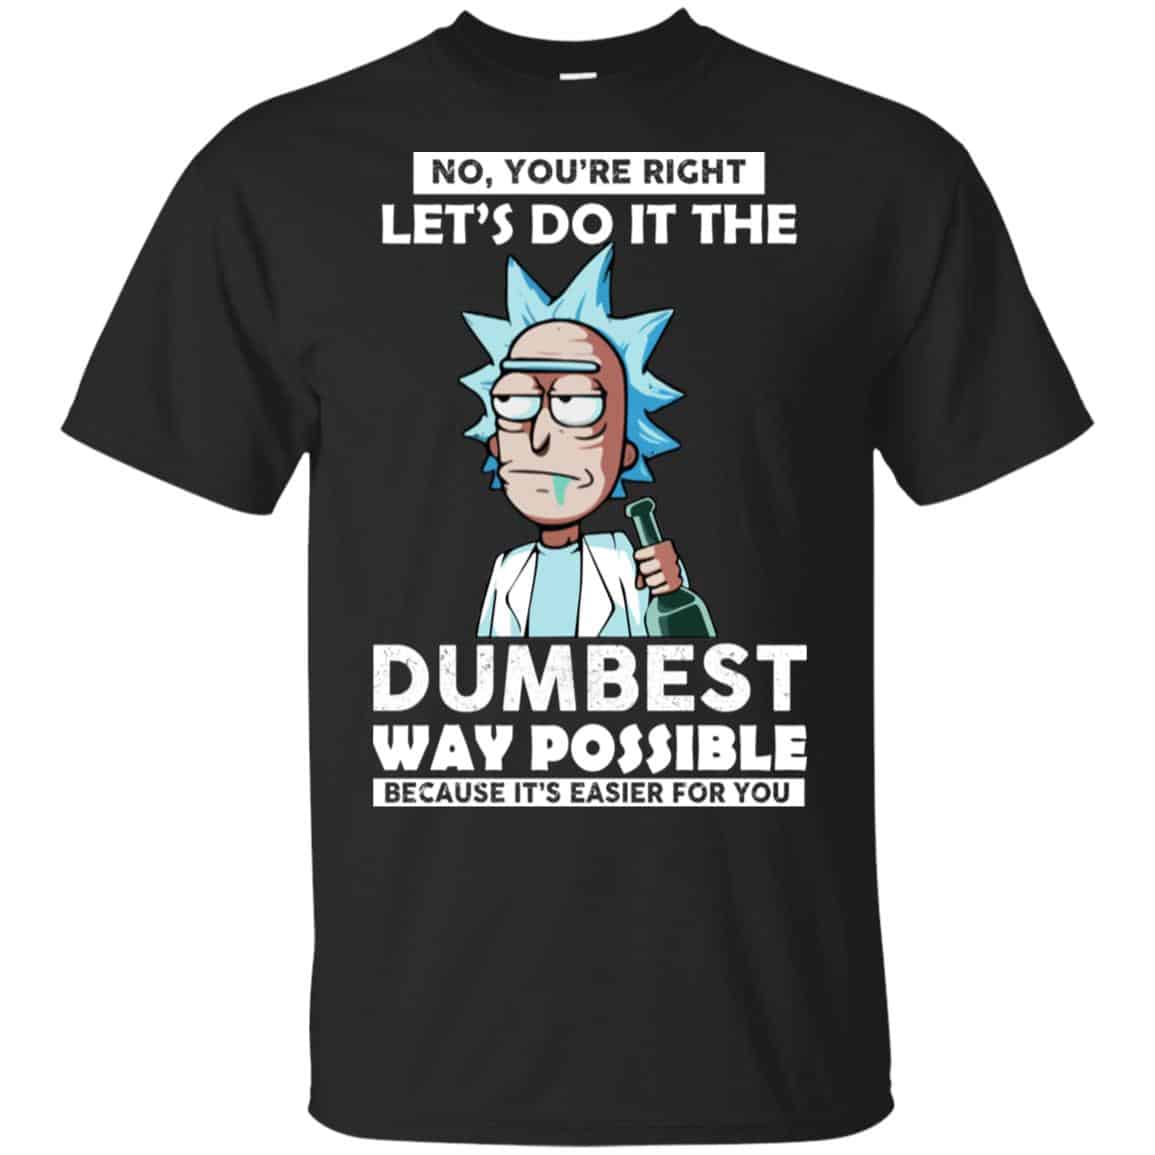 Ready rick and morty t shirt dumbest way possible cheap queenstown